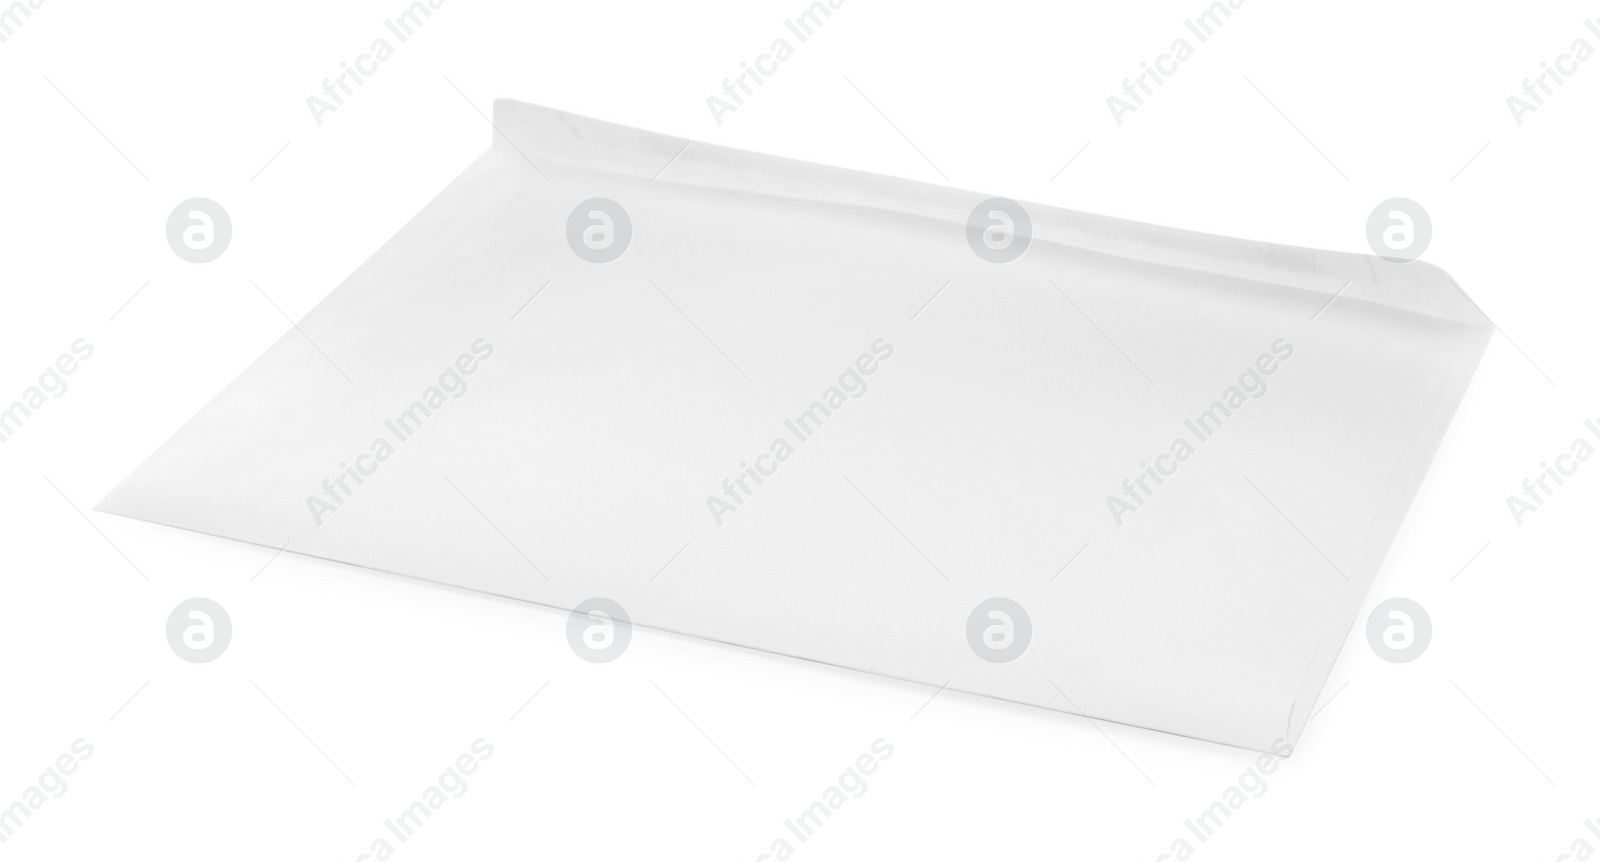 Photo of One simple paper envelope isolated on white